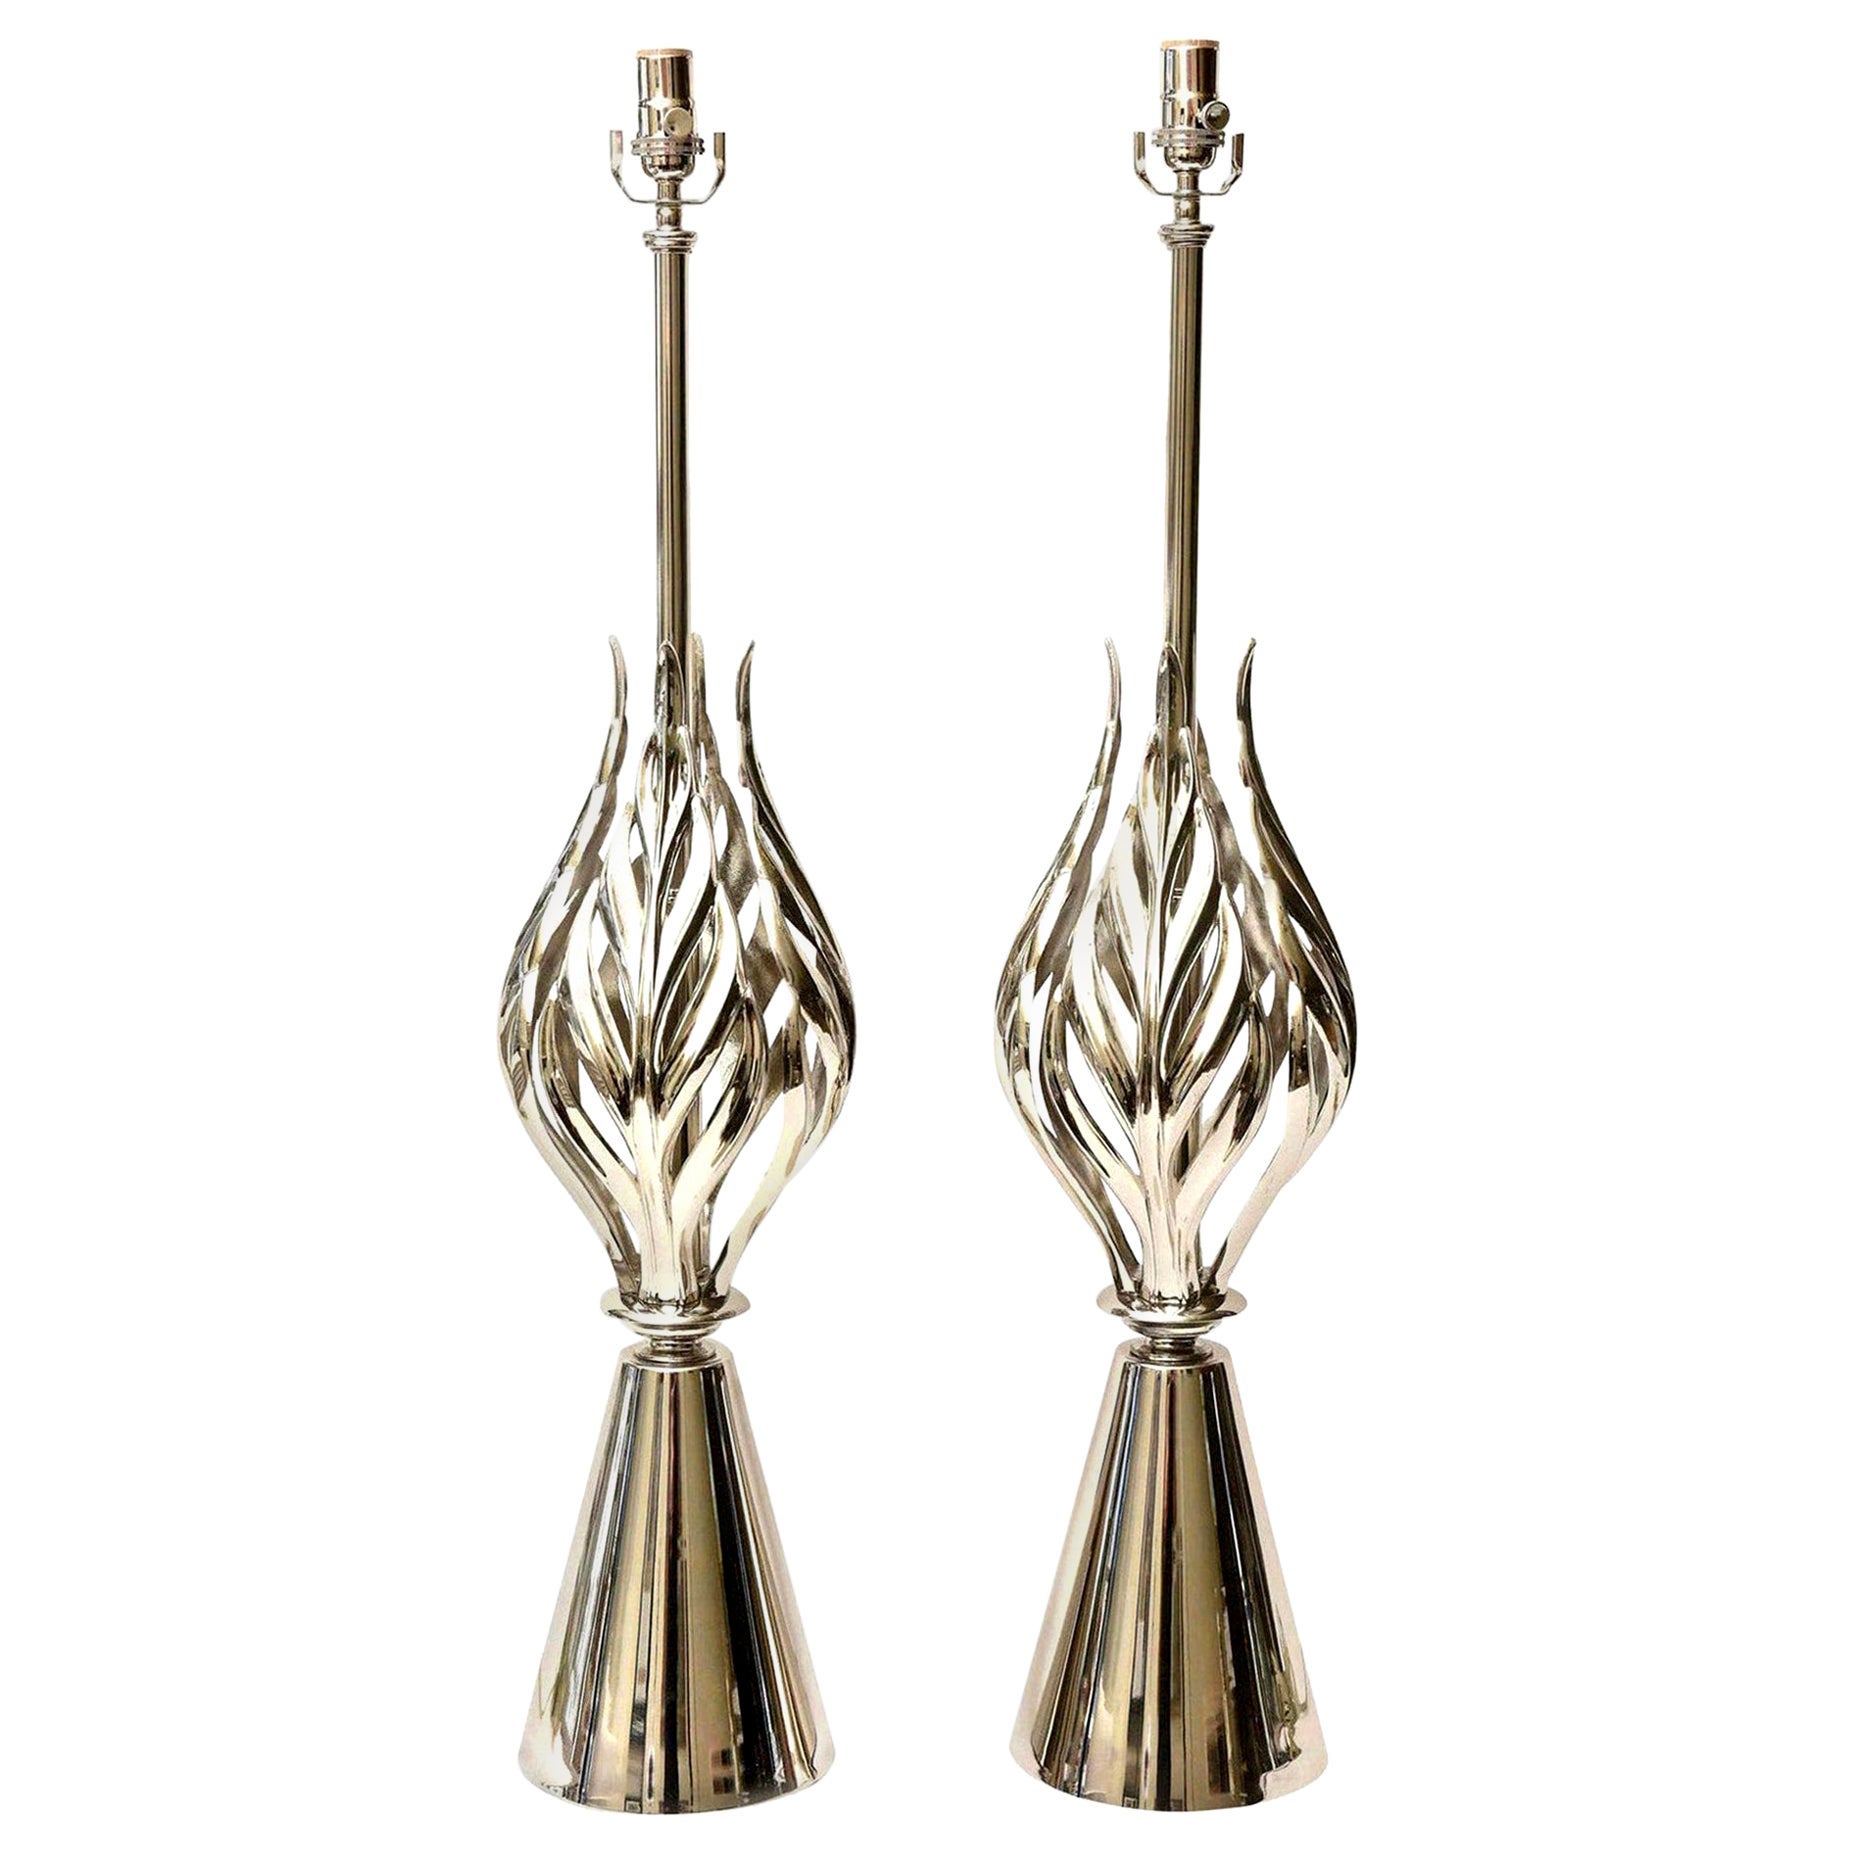  Rembrandt Vintage Restored Nickel Silver Lamps Mid-Century Modern Pair of For Sale